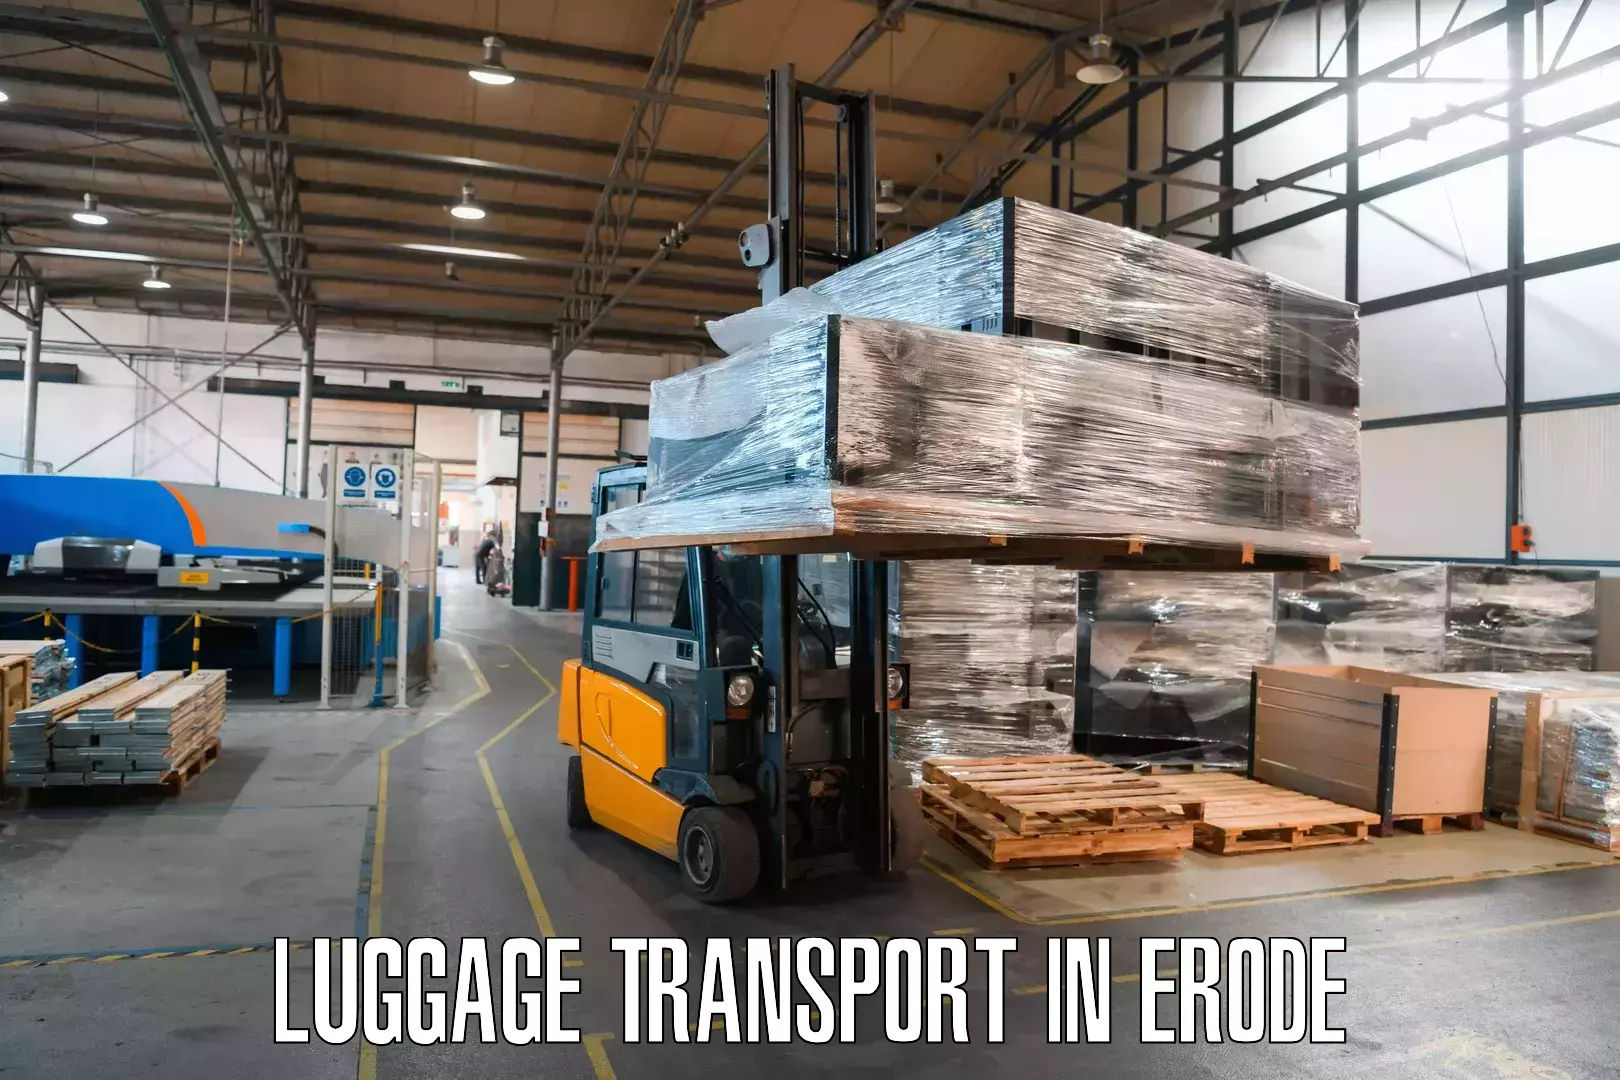 Luggage transport company in Erode